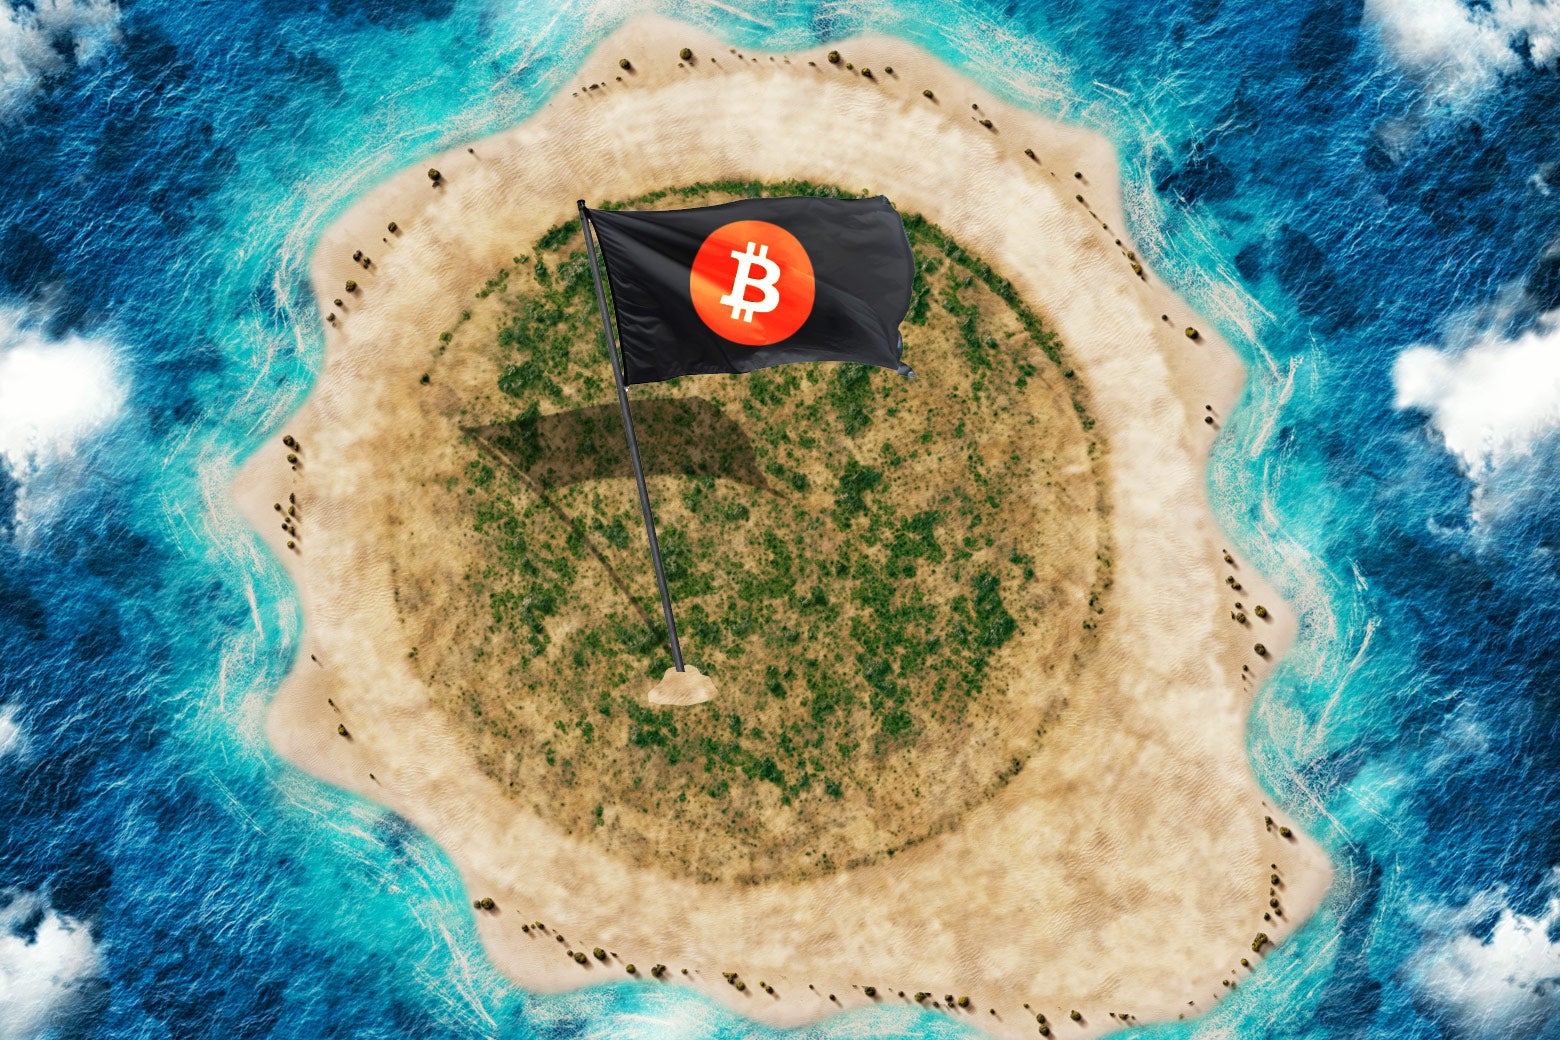 A island with a cryptocurrency flag